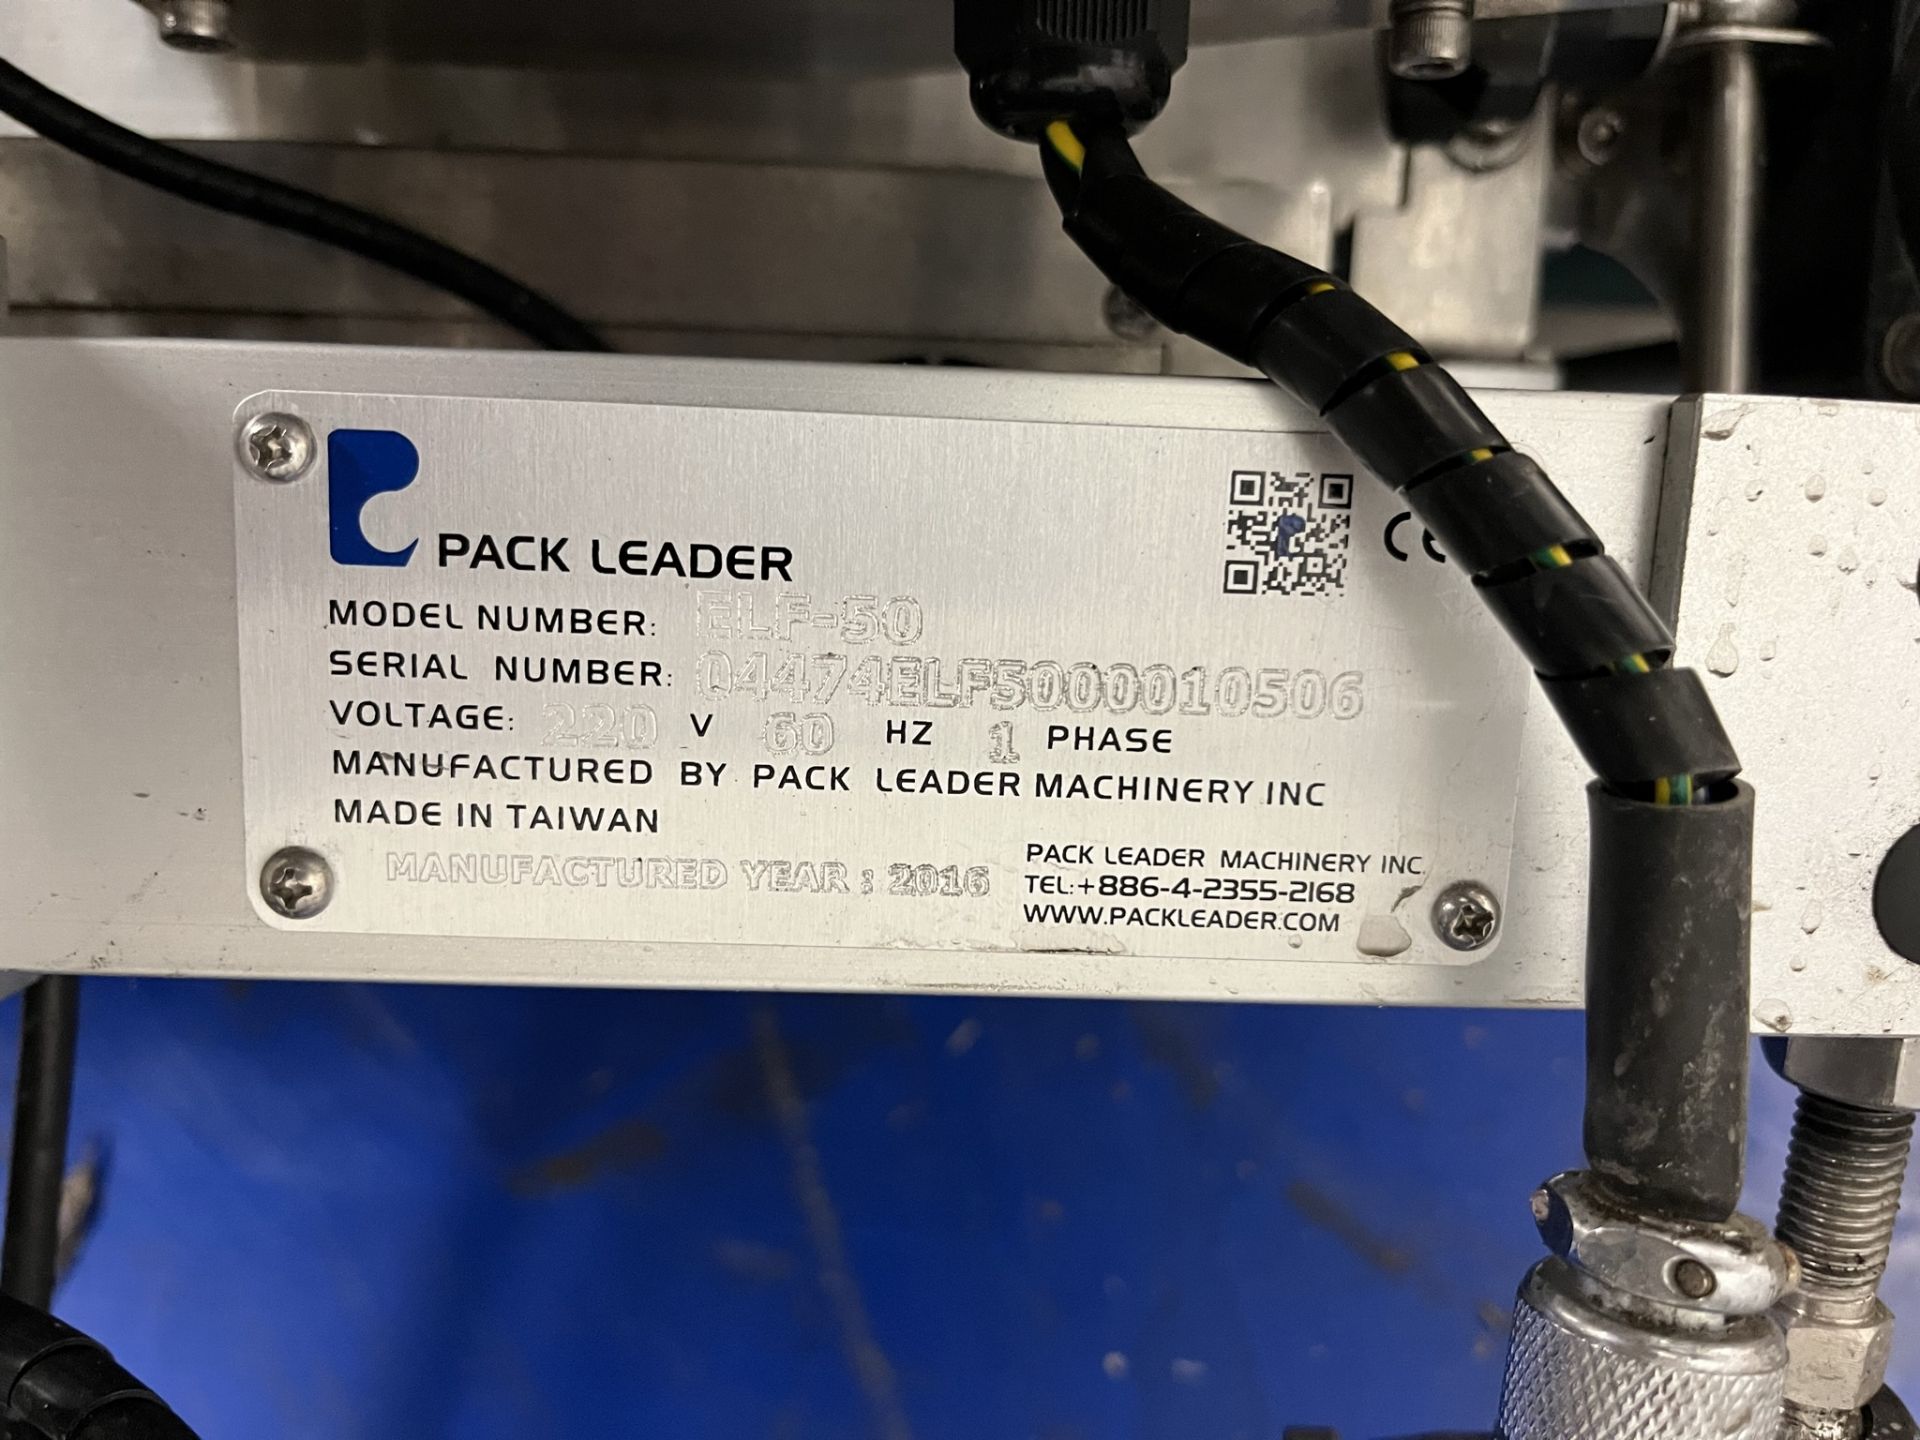 Pack Leader ELF-50 Benchtop horizontal through feed labeller 2016 - Image 3 of 4